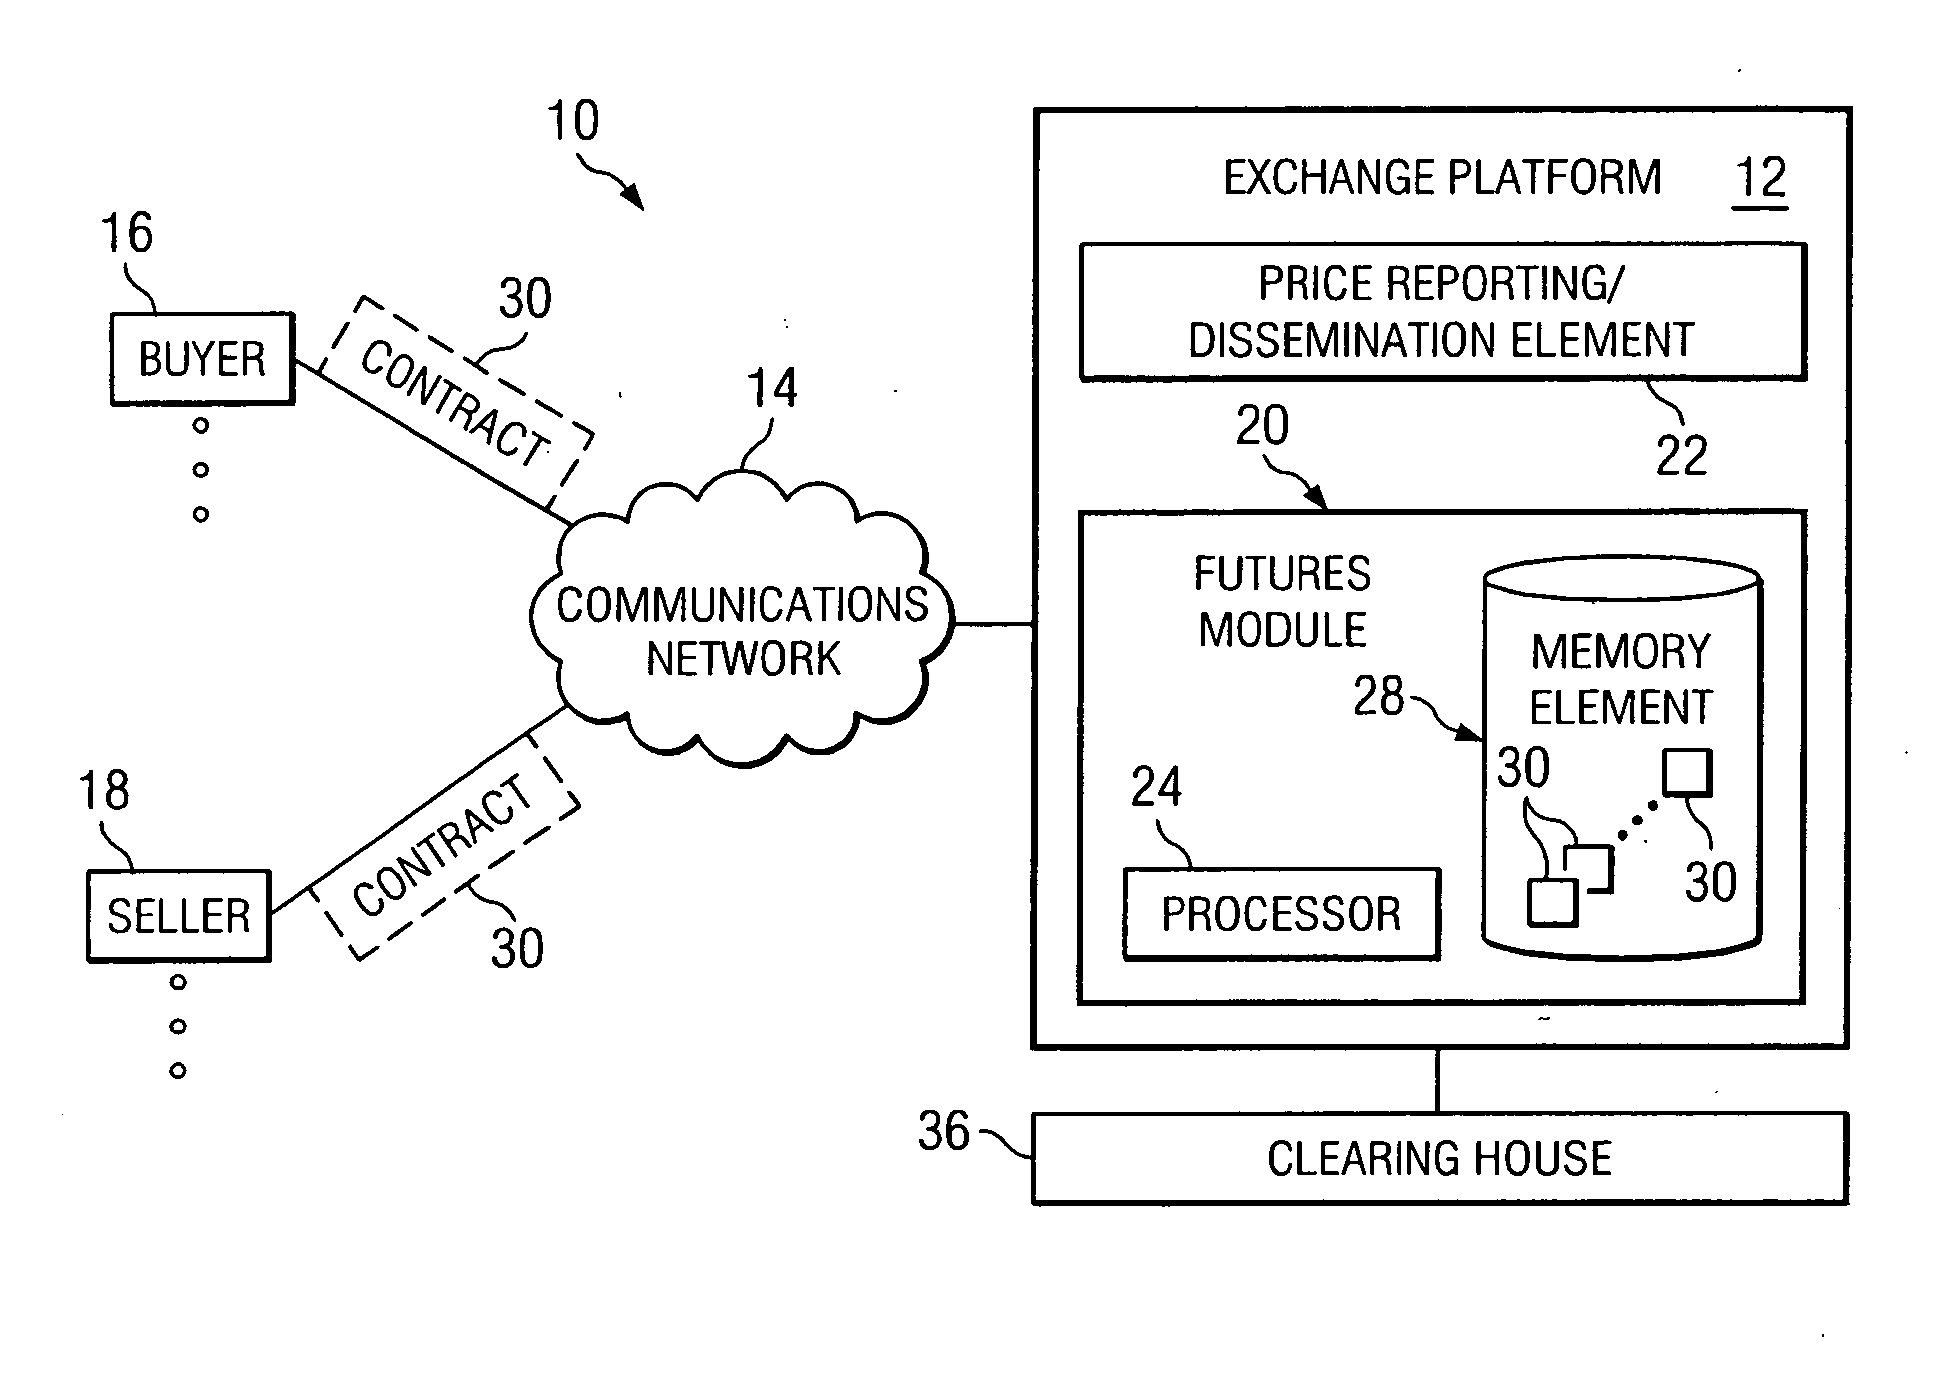 System and method for providing futures contracts in a financial market environment